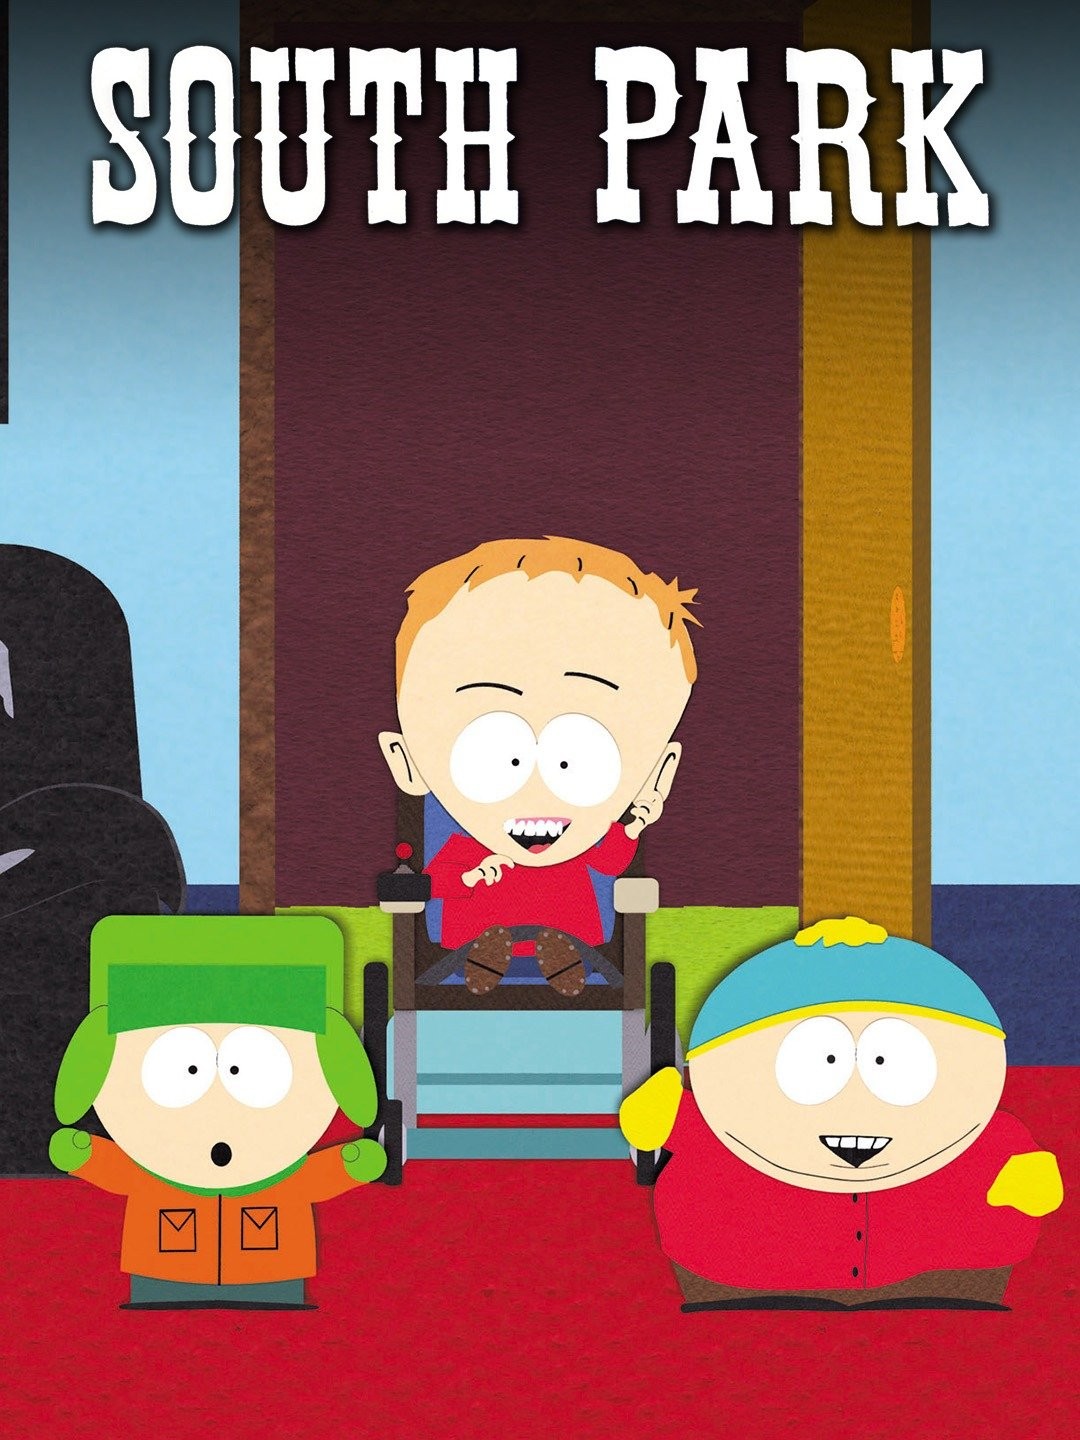 South Park: The Streaming Wars - Rotten Tomatoes